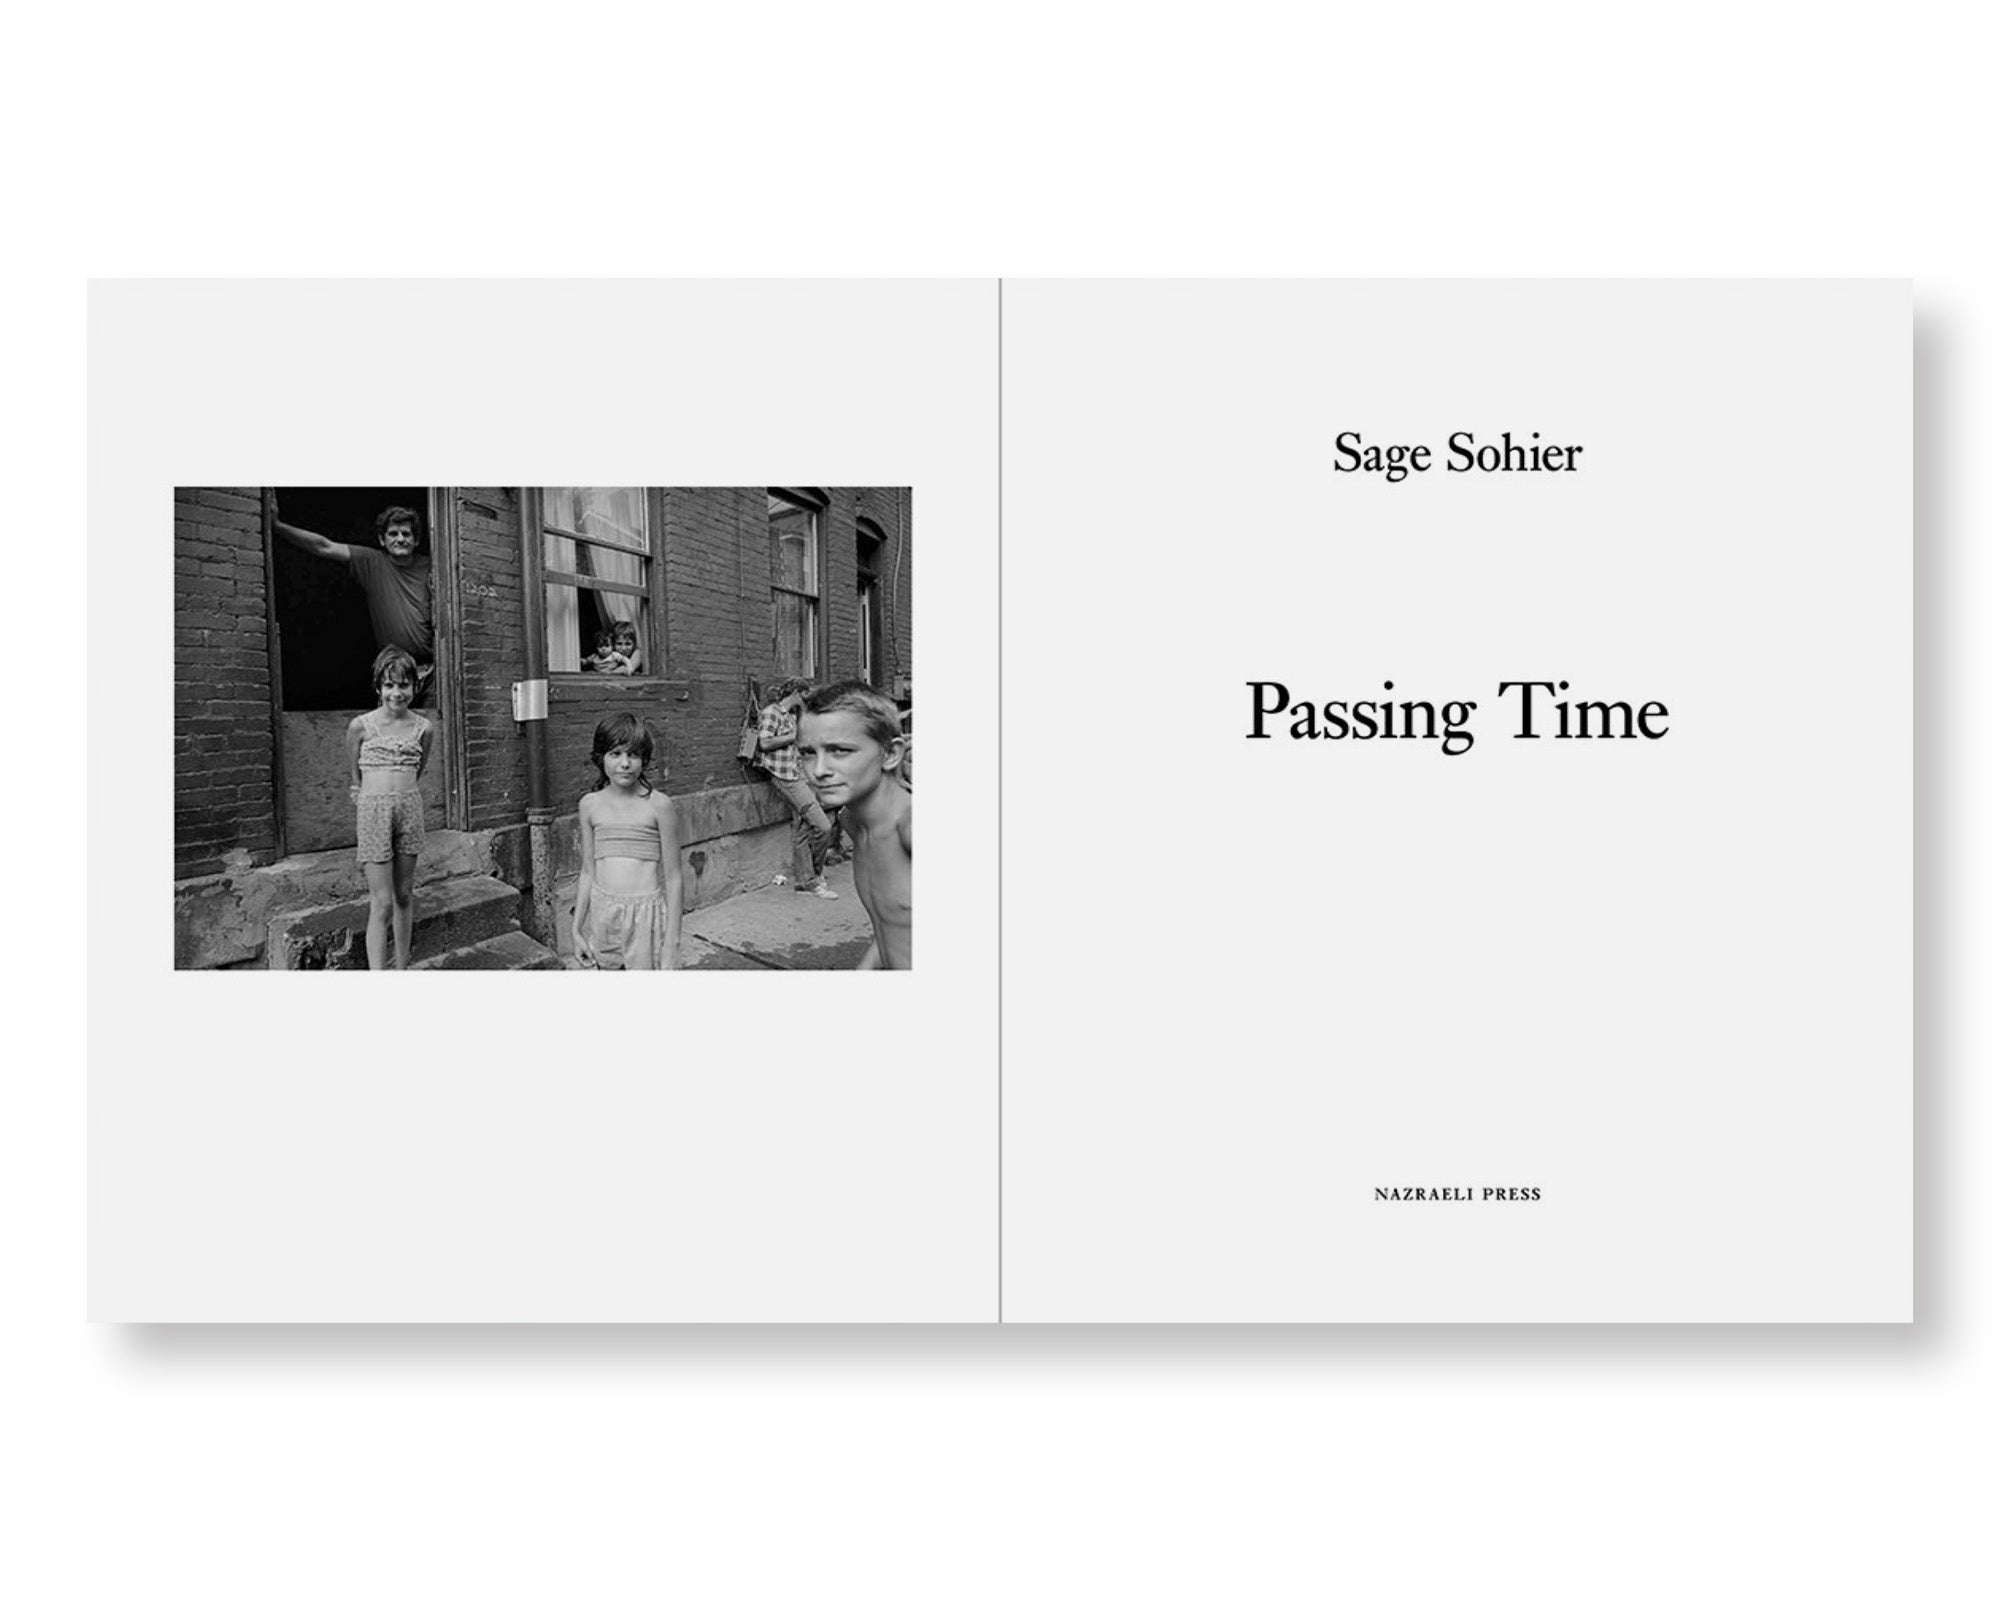 PASSING TIME by Sage Sohier